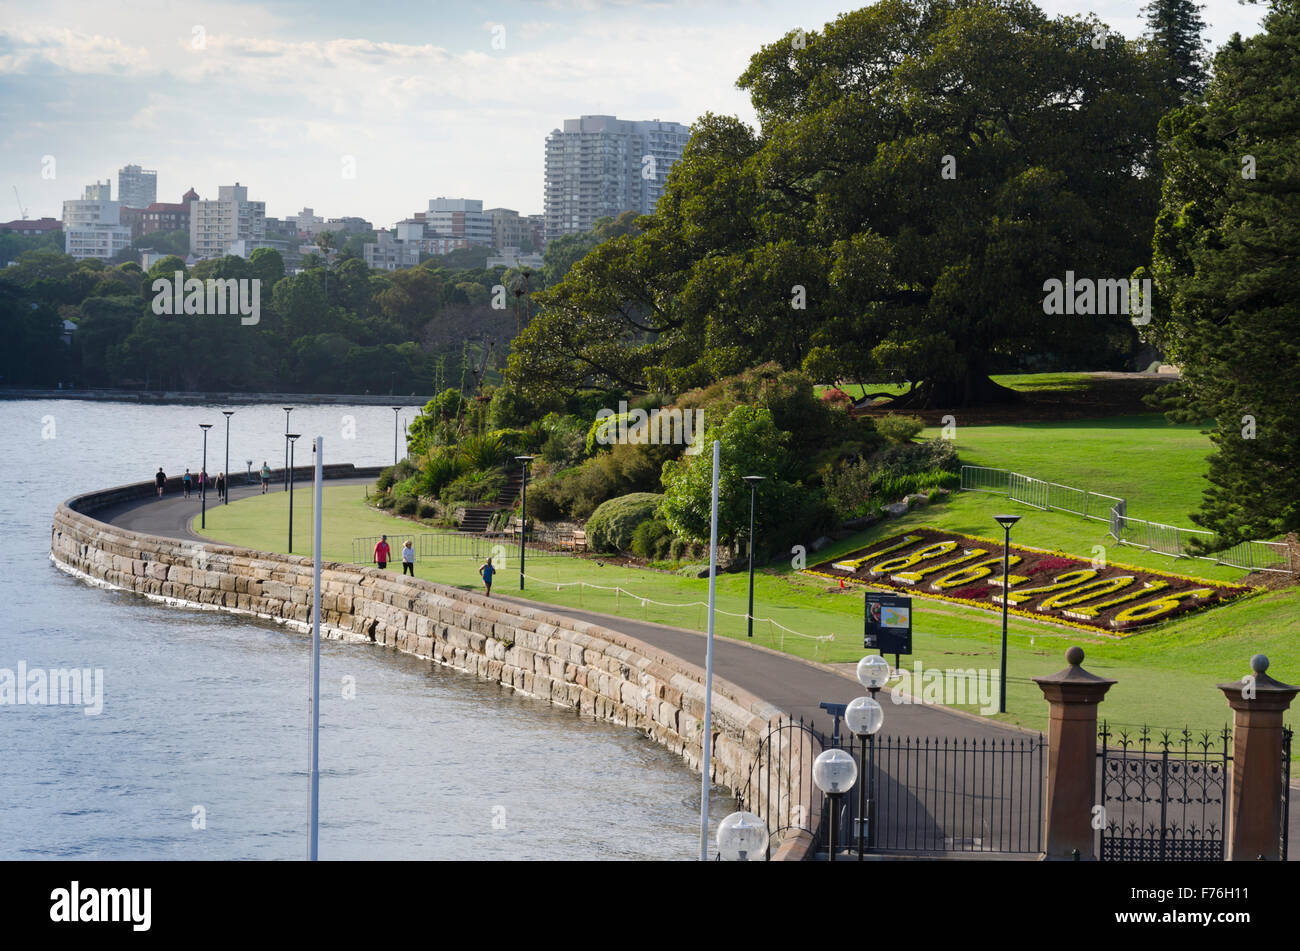 The 200 year anniversary of the Royal Botanic Gardens in Sydney near the Sydney Opera House in New South Wales, Australia Stock Photo